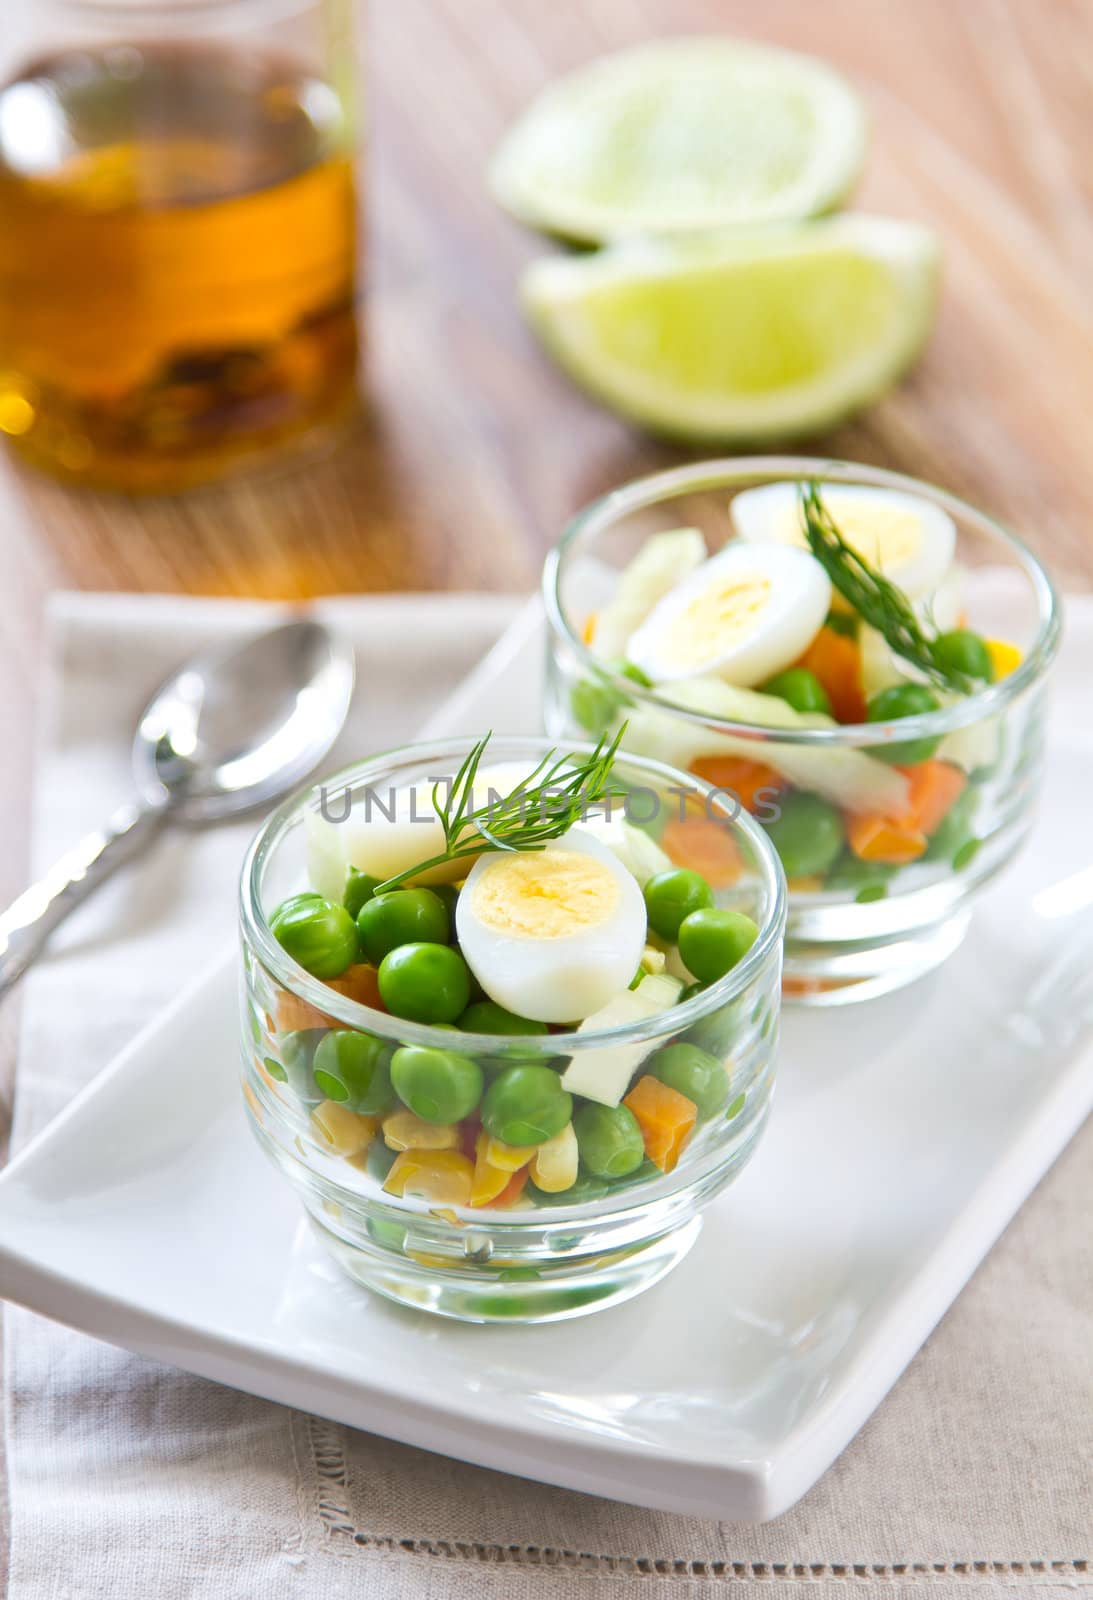 Qail egg with pea,corn and carrot salad